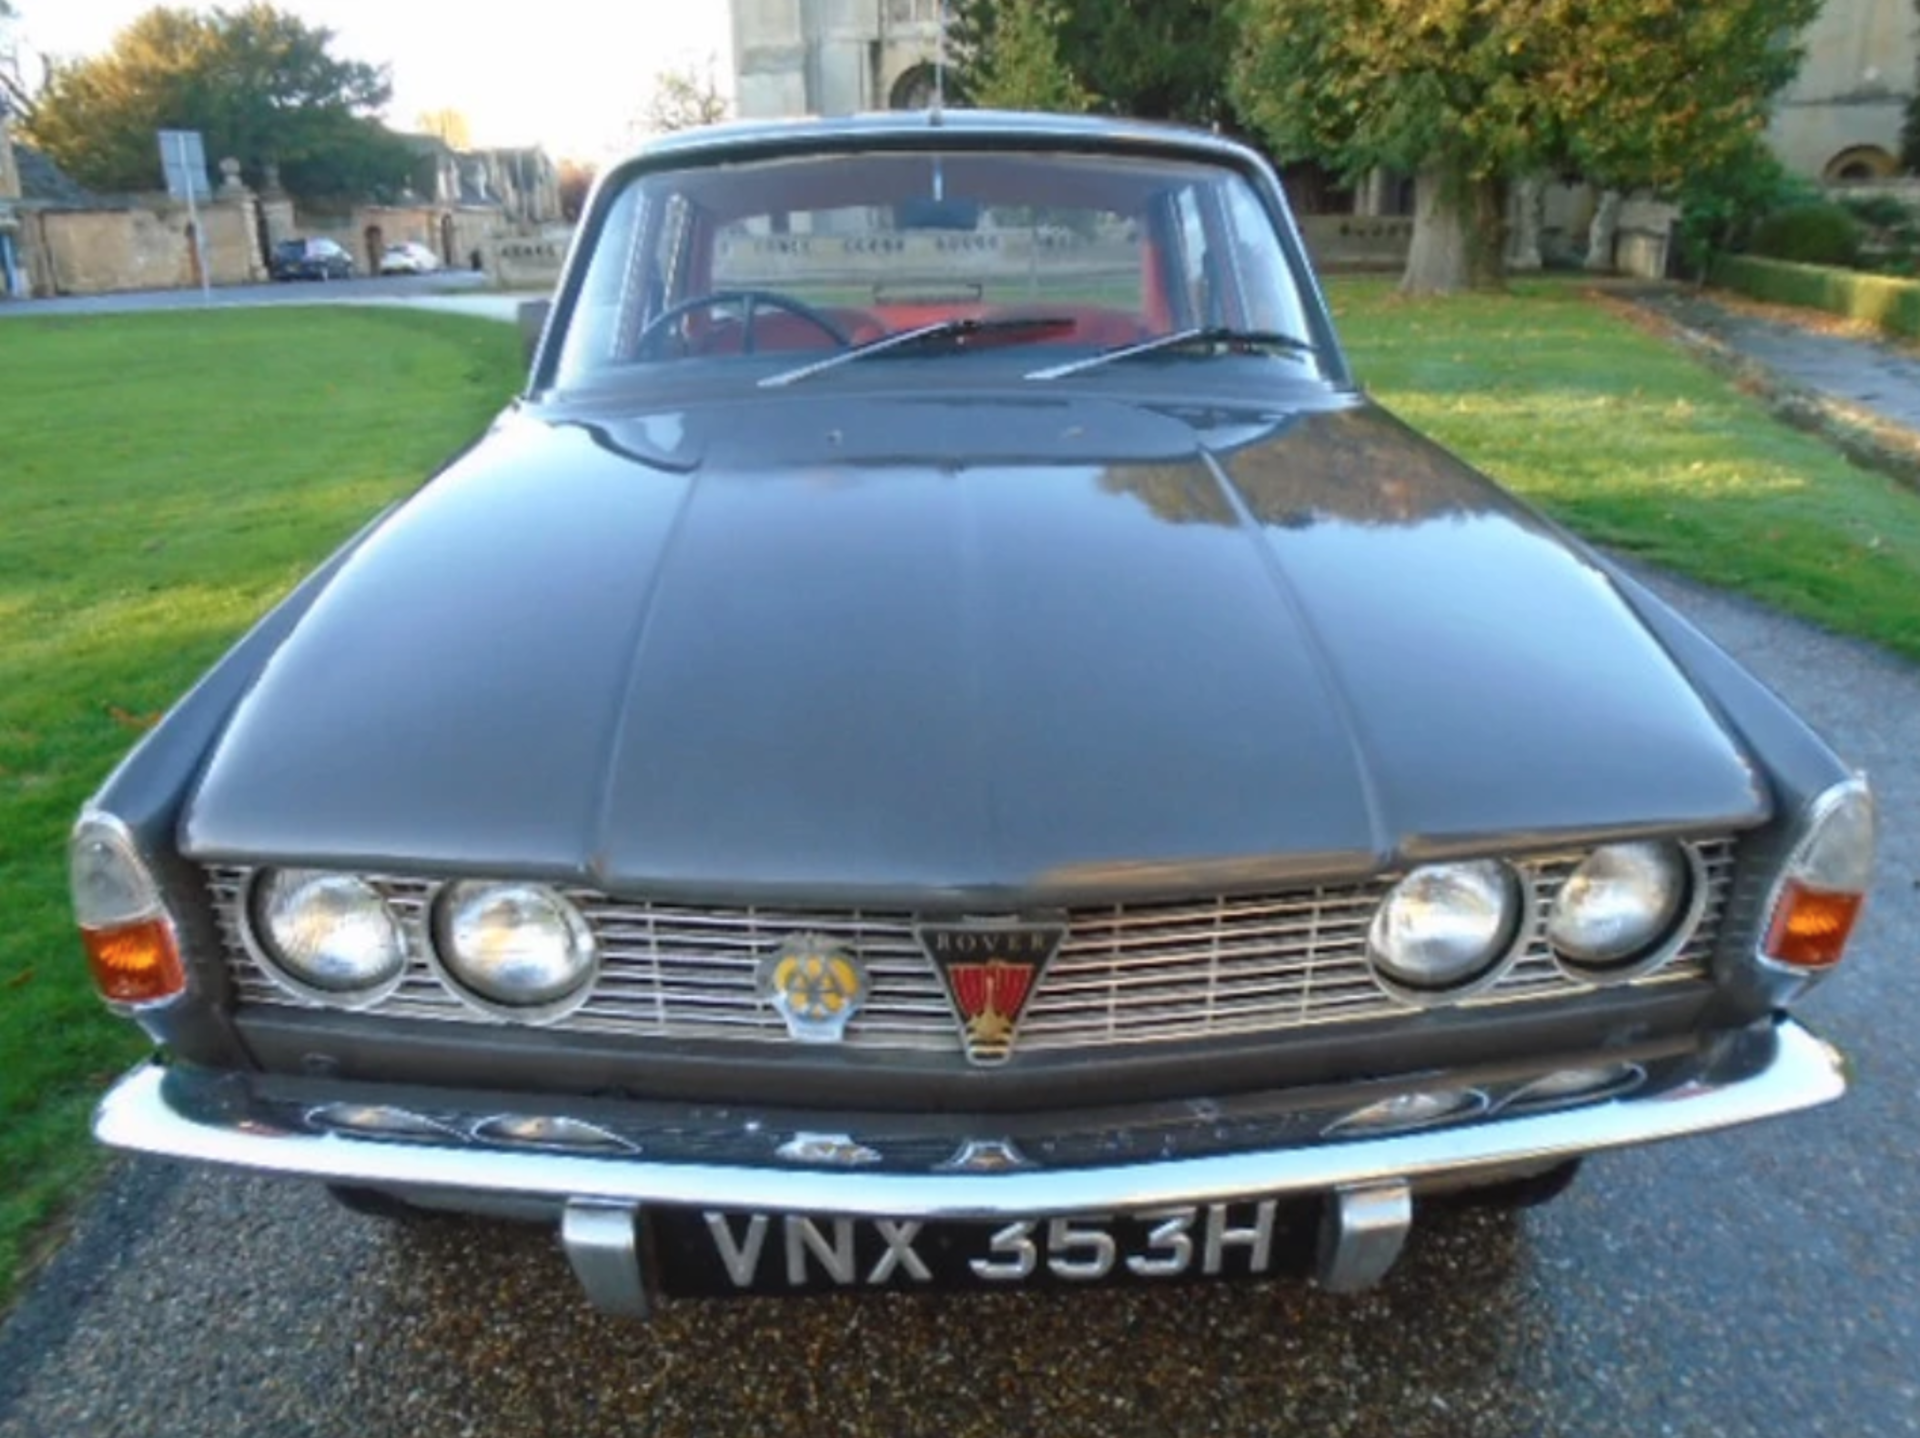 1969 Rover P6 2000 Automatic MK1 - Image 3 of 7